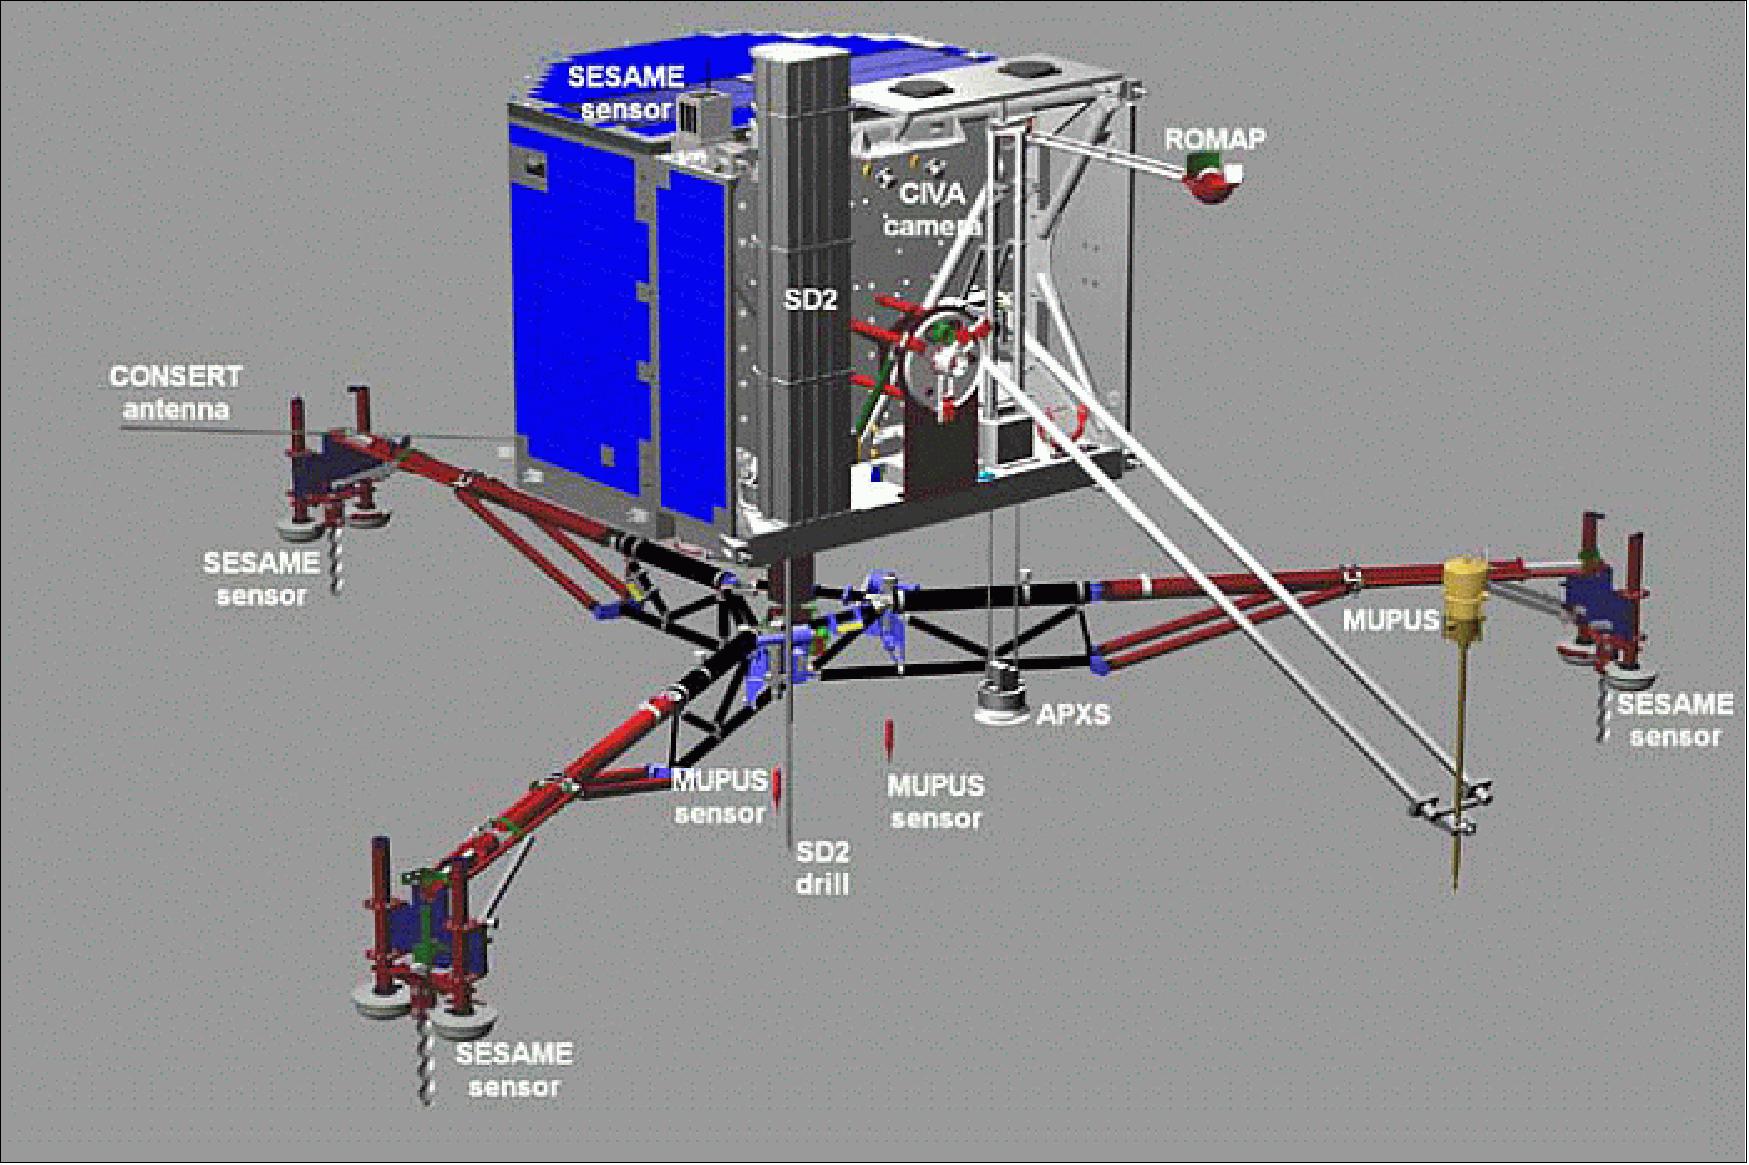 Figure 27: A schematic view of the Philae spacecraft with the extended lander system (image credit: Philae Team)